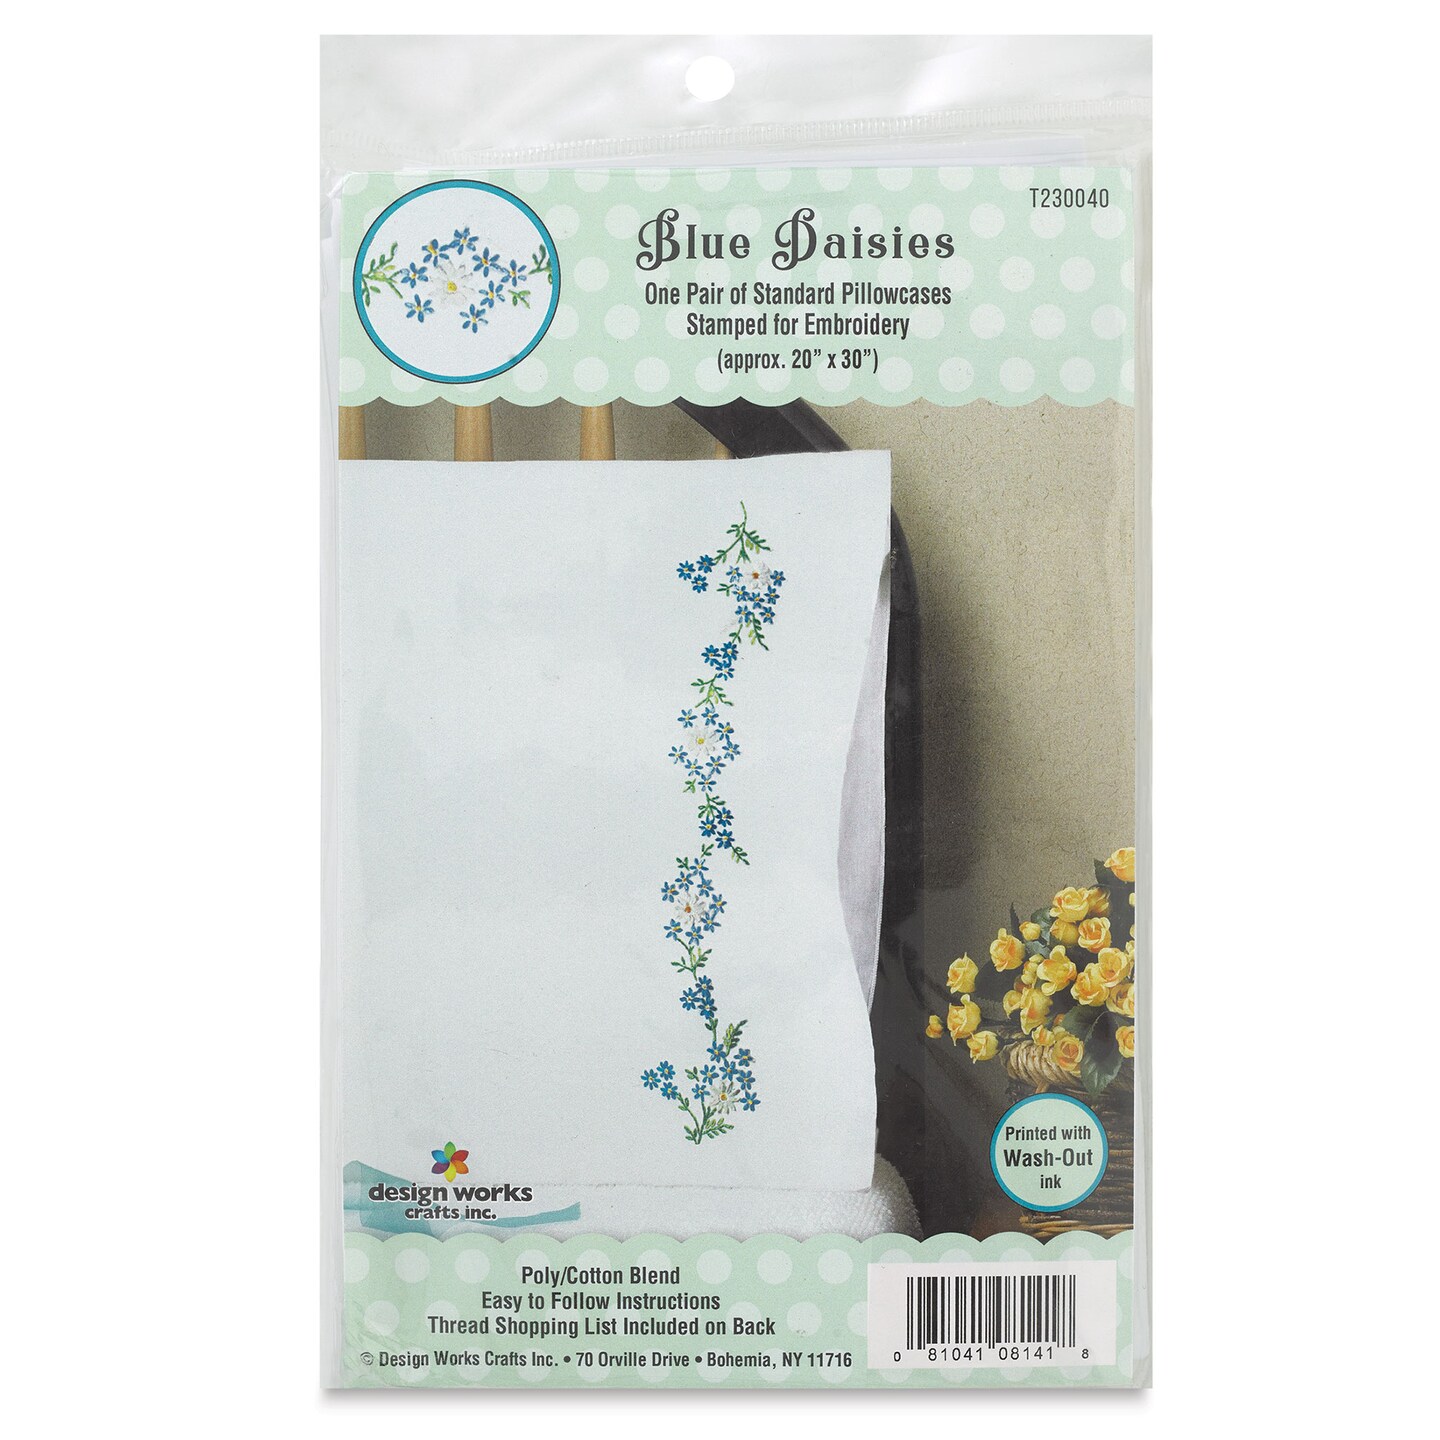 Design Works Stamped For Embroidery Pillowcase - Blue Daisies, Pkg of 2